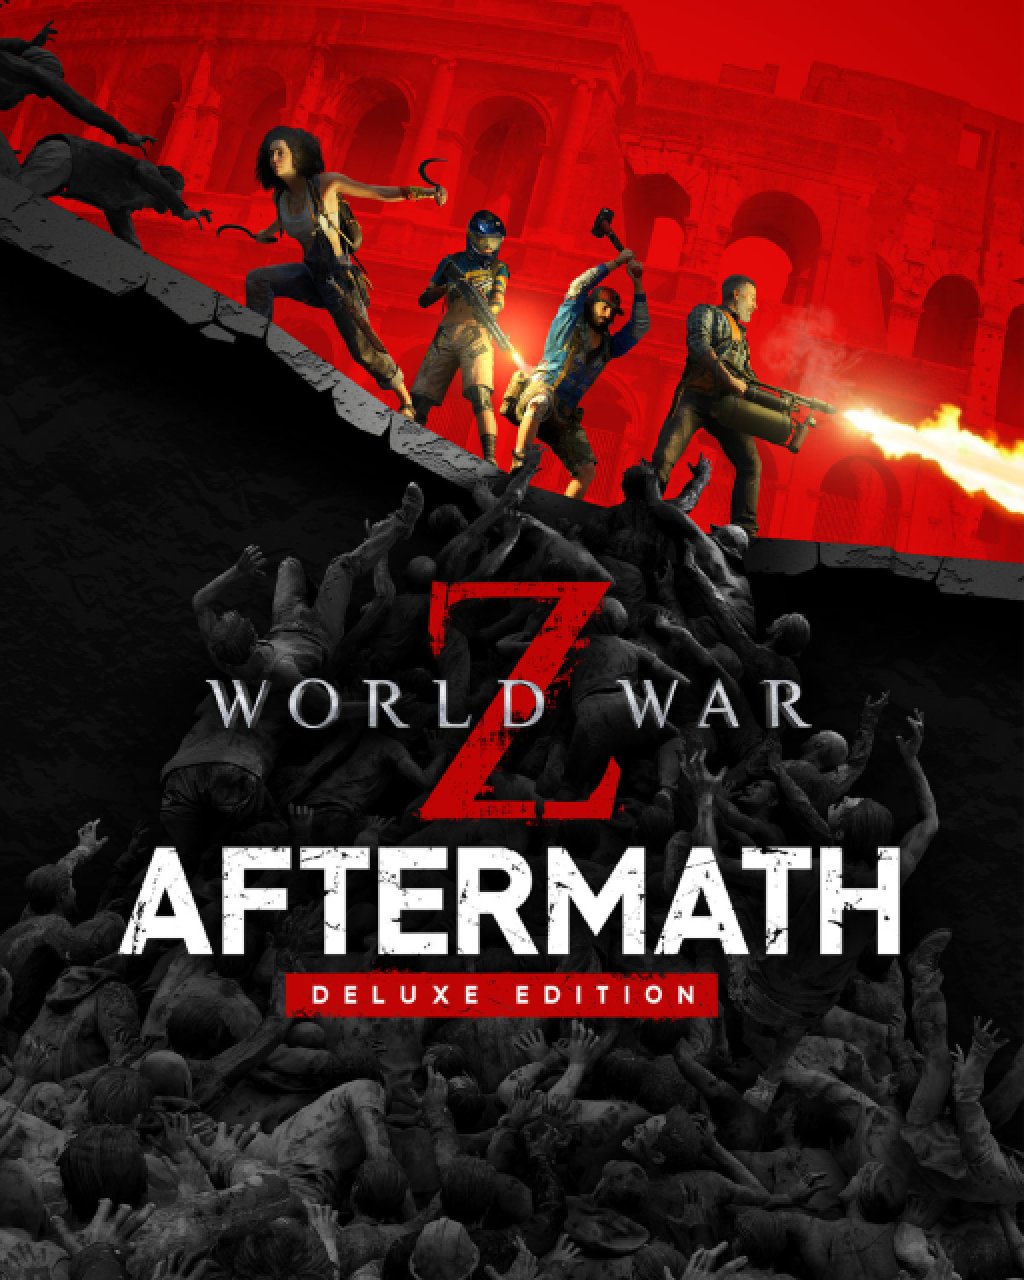 World War Z Aftermath Deluxe Edition